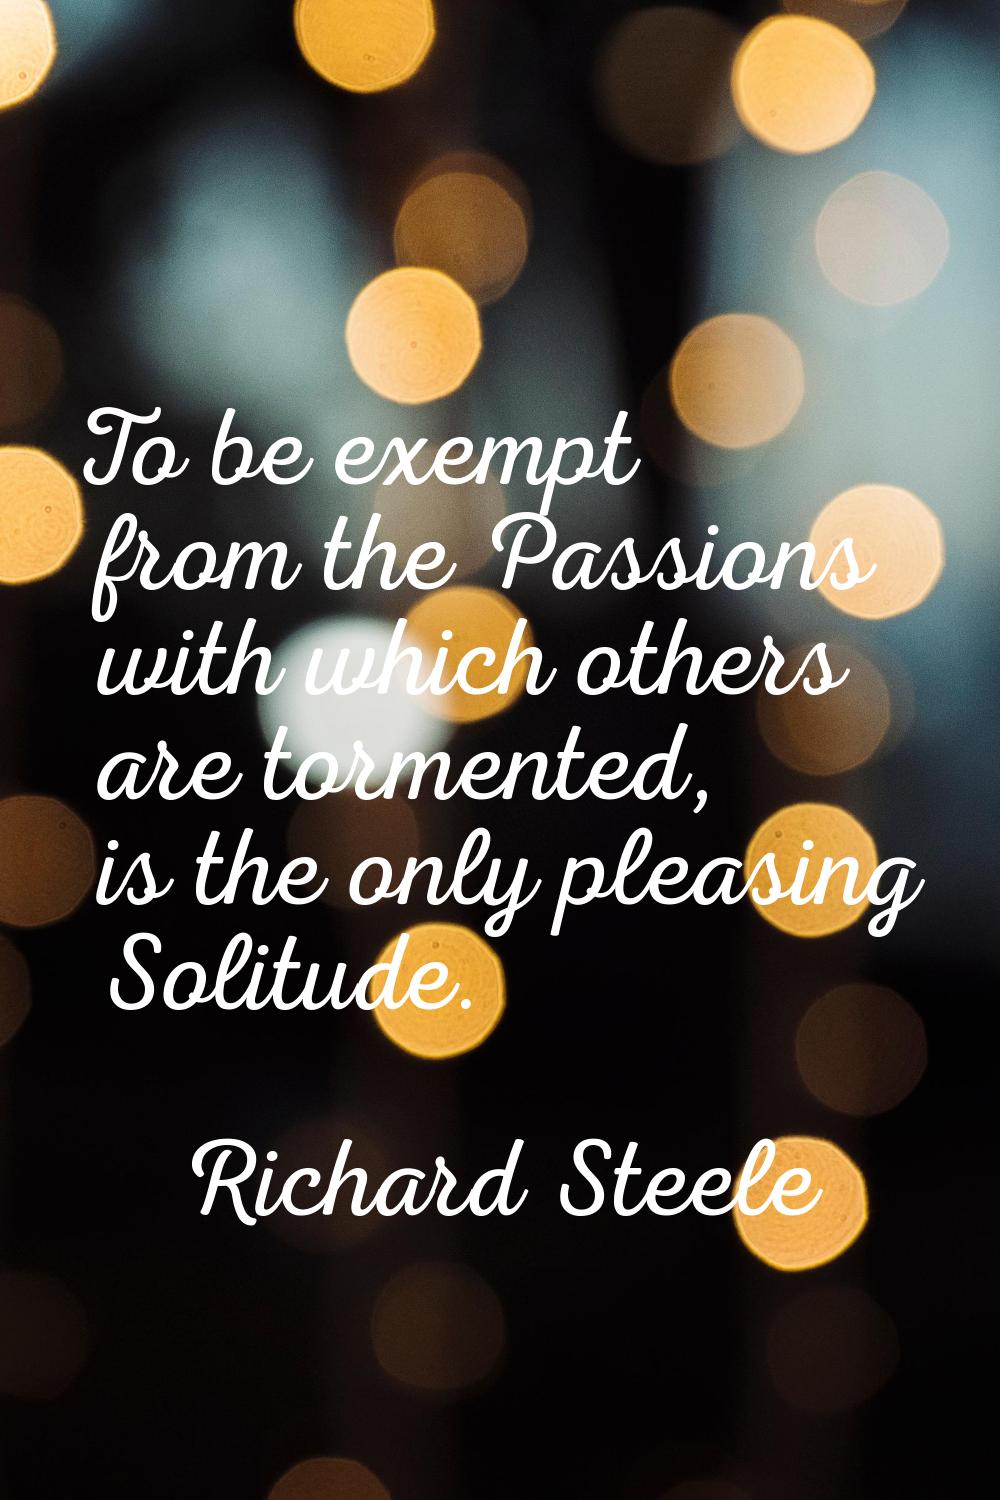 To be exempt from the Passions with which others are tormented, is the only pleasing Solitude.